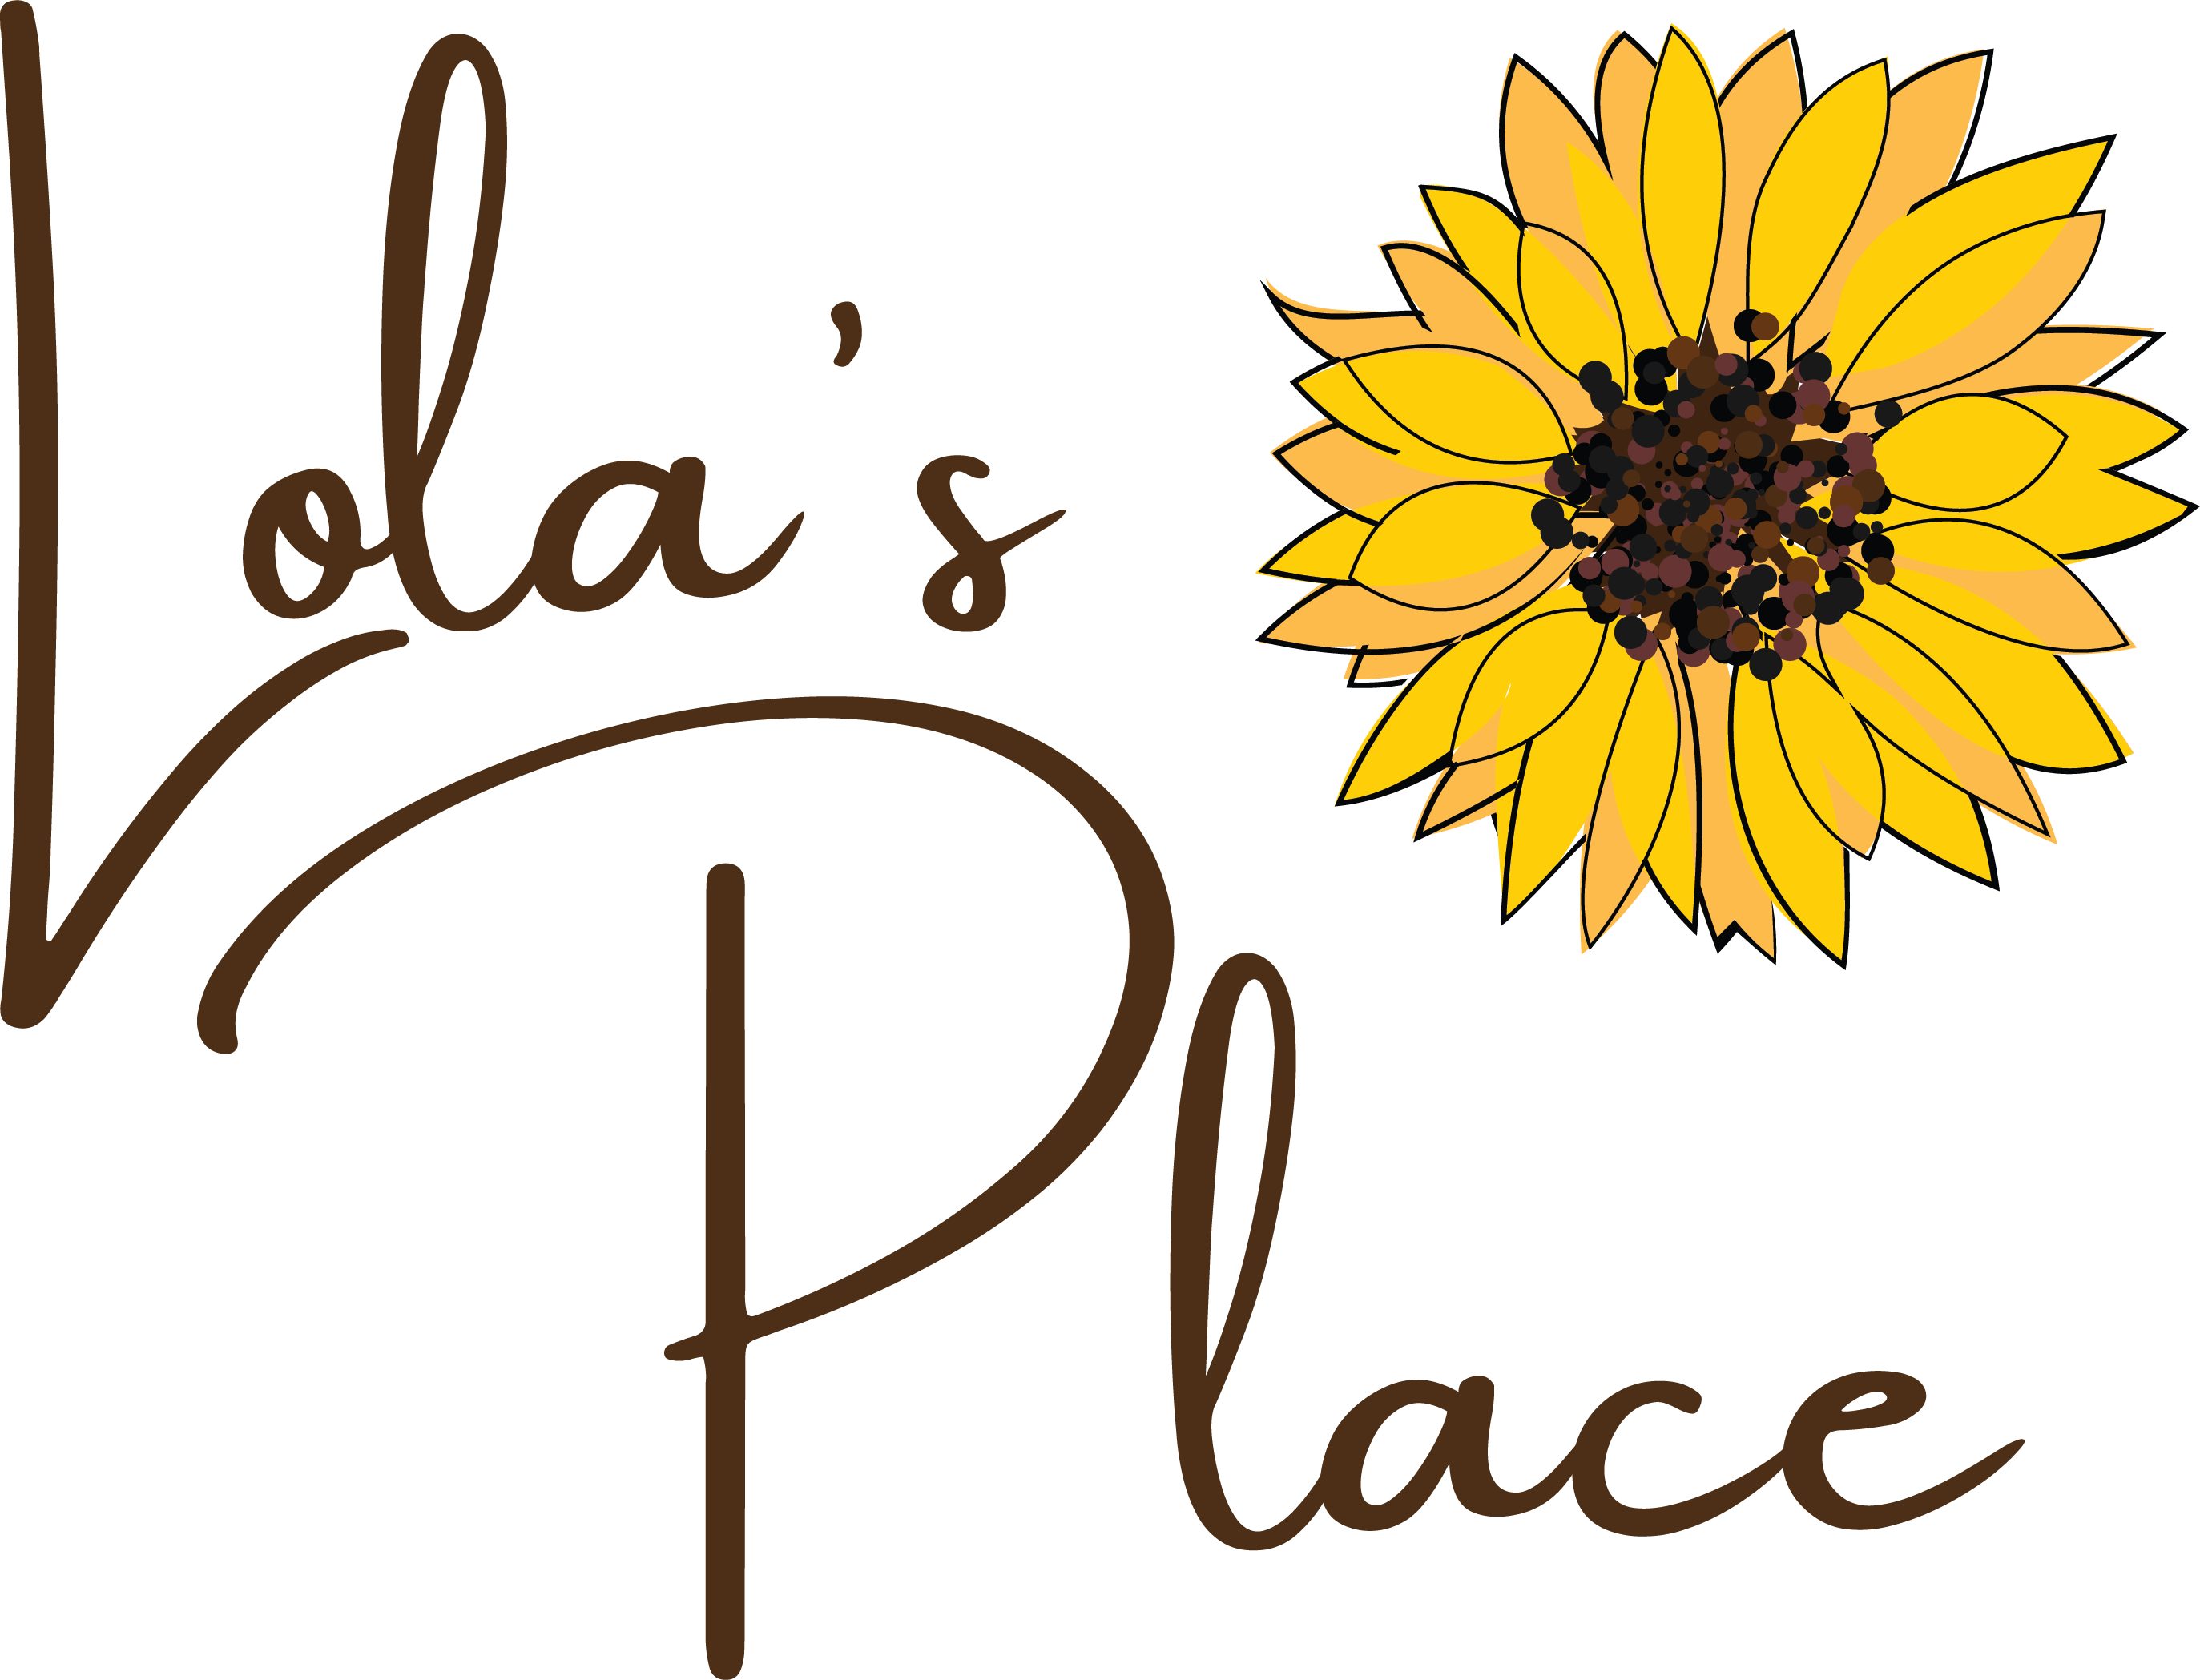 Lola's Place